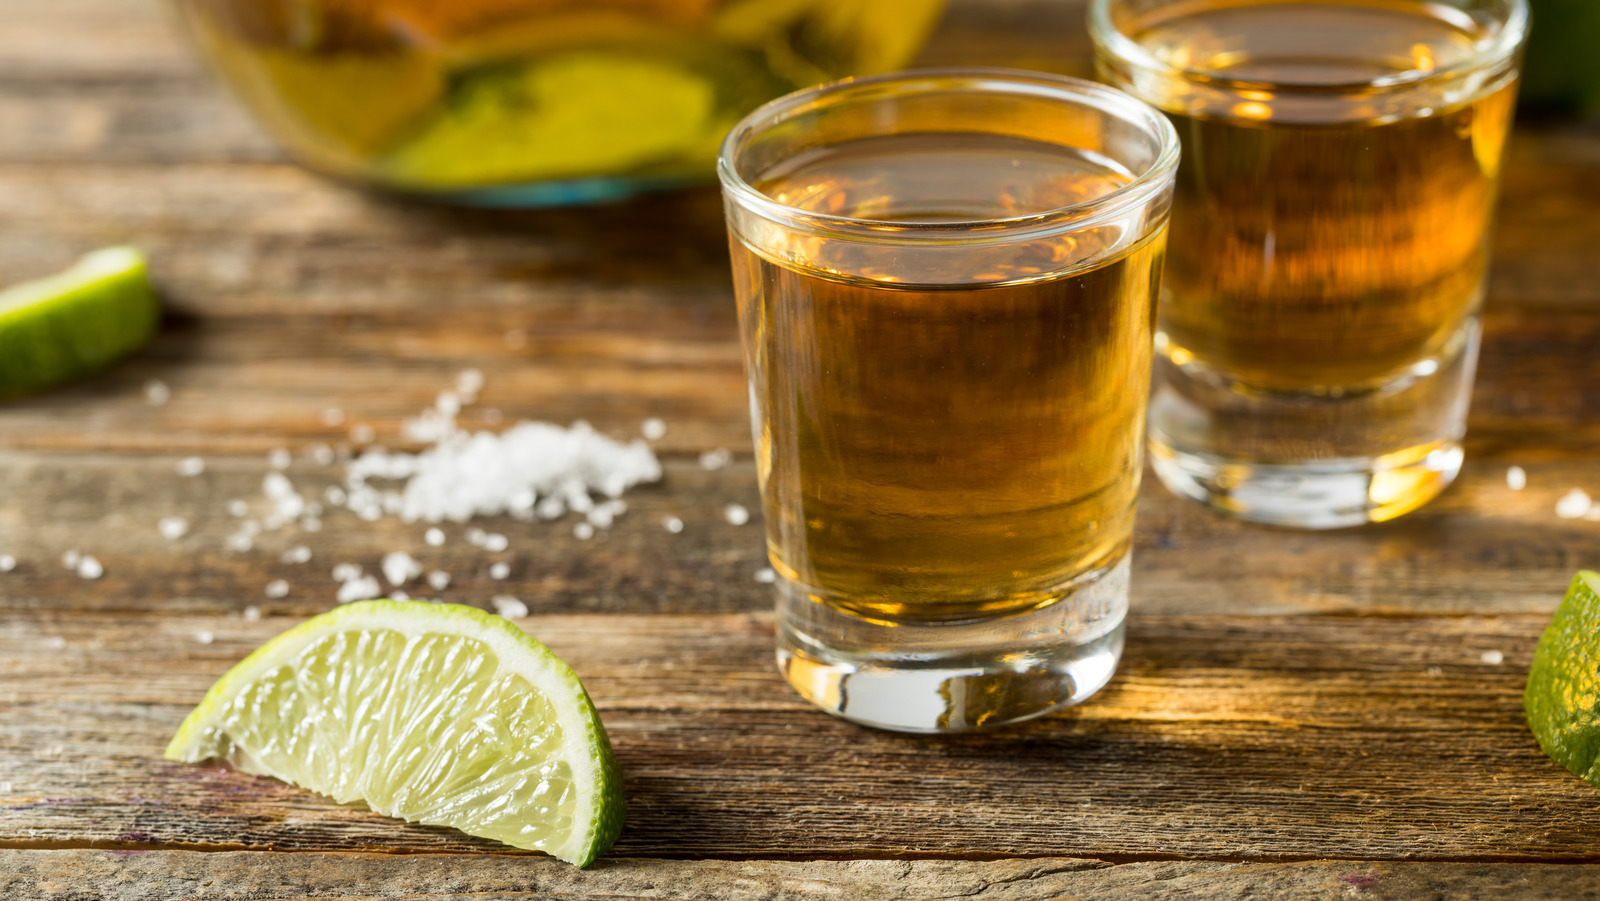 You Should Try Adding Tequila To Your BBQ Sauce. Here's Why - Tasting Table